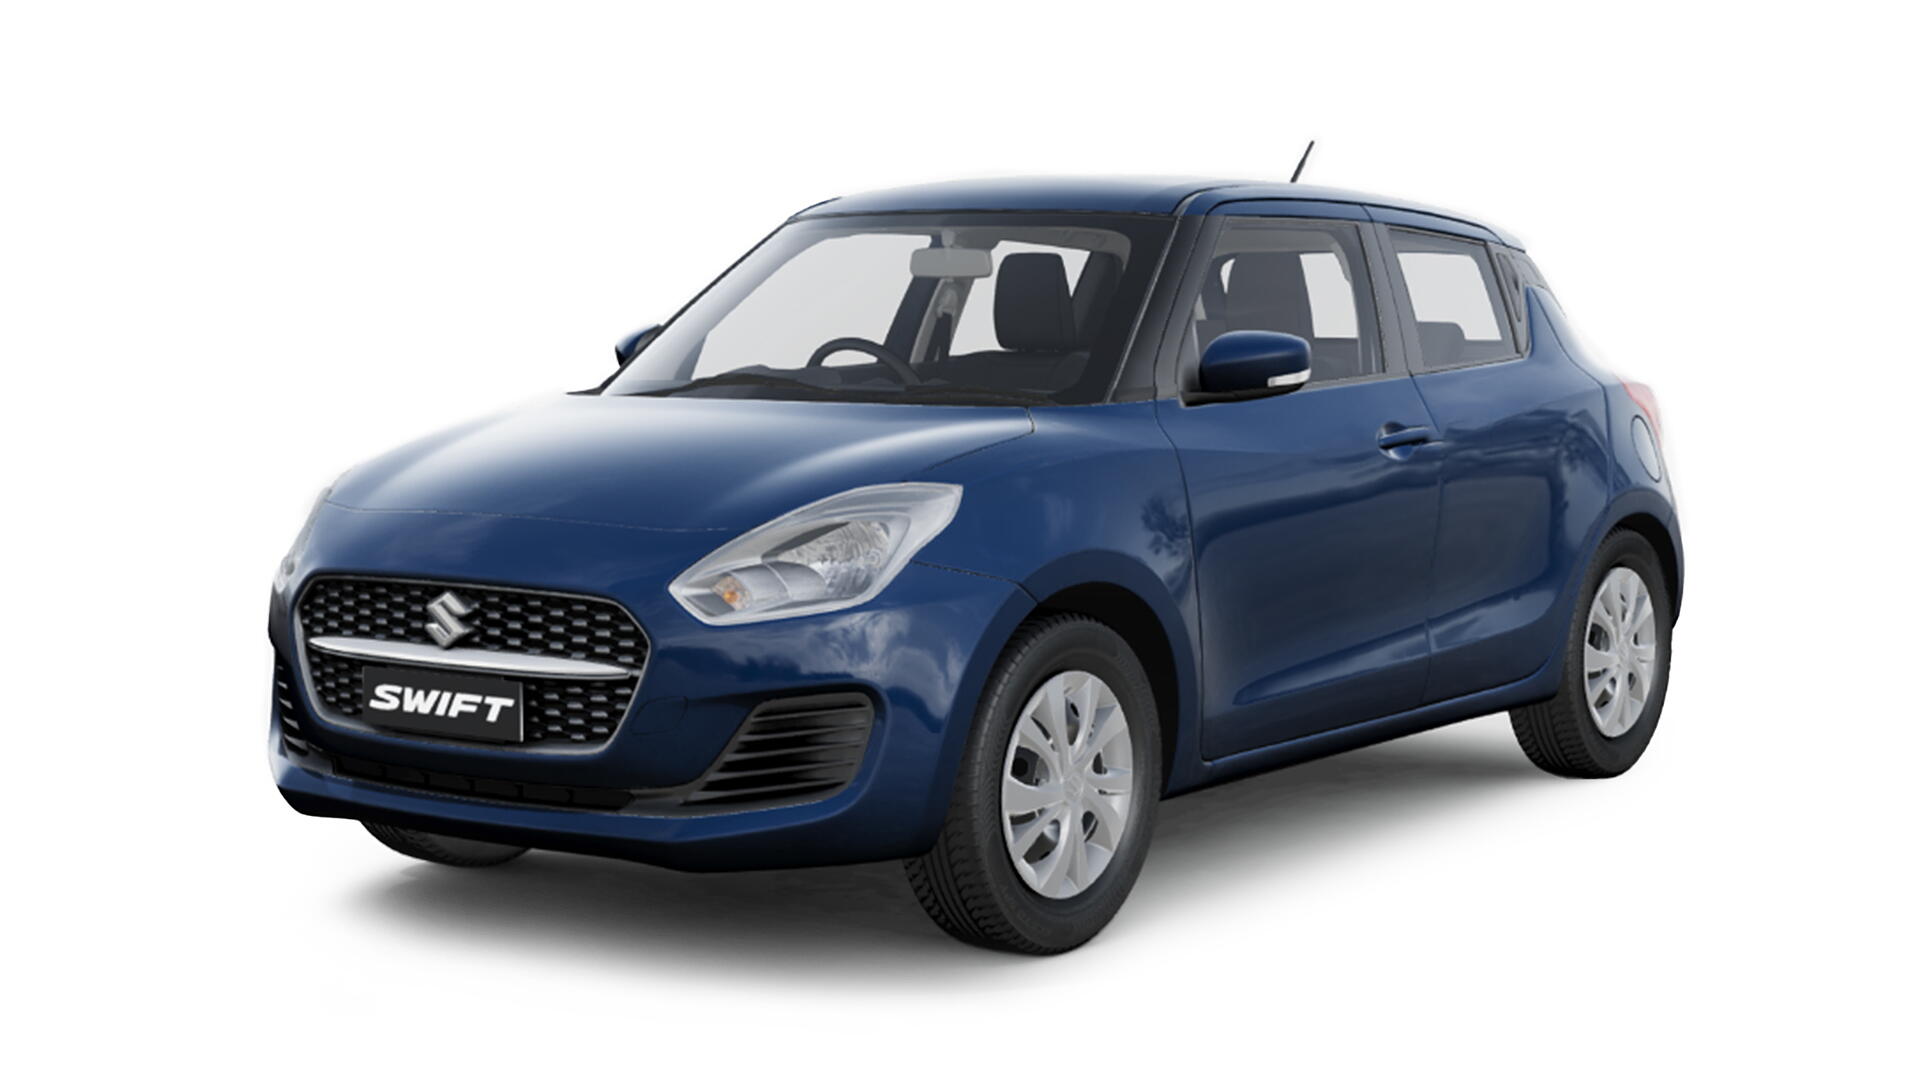 Maruti Swift VXi On Road Price, Specs, Review, Images, Colours | CarTrade